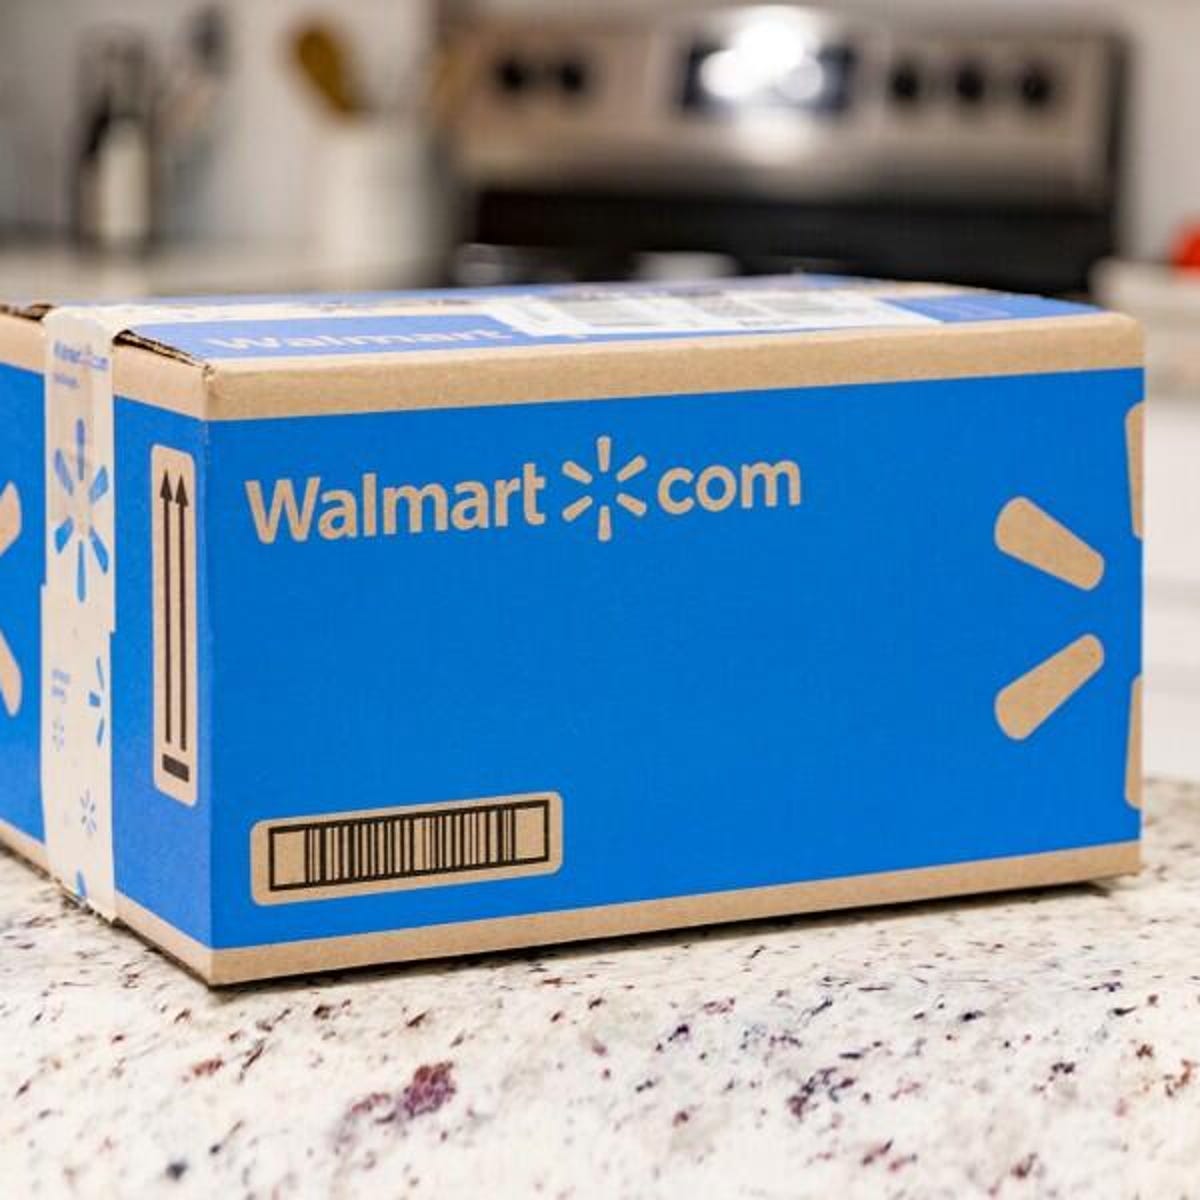 Walmart adds pickup option for returns. Here's how to use it - CNET